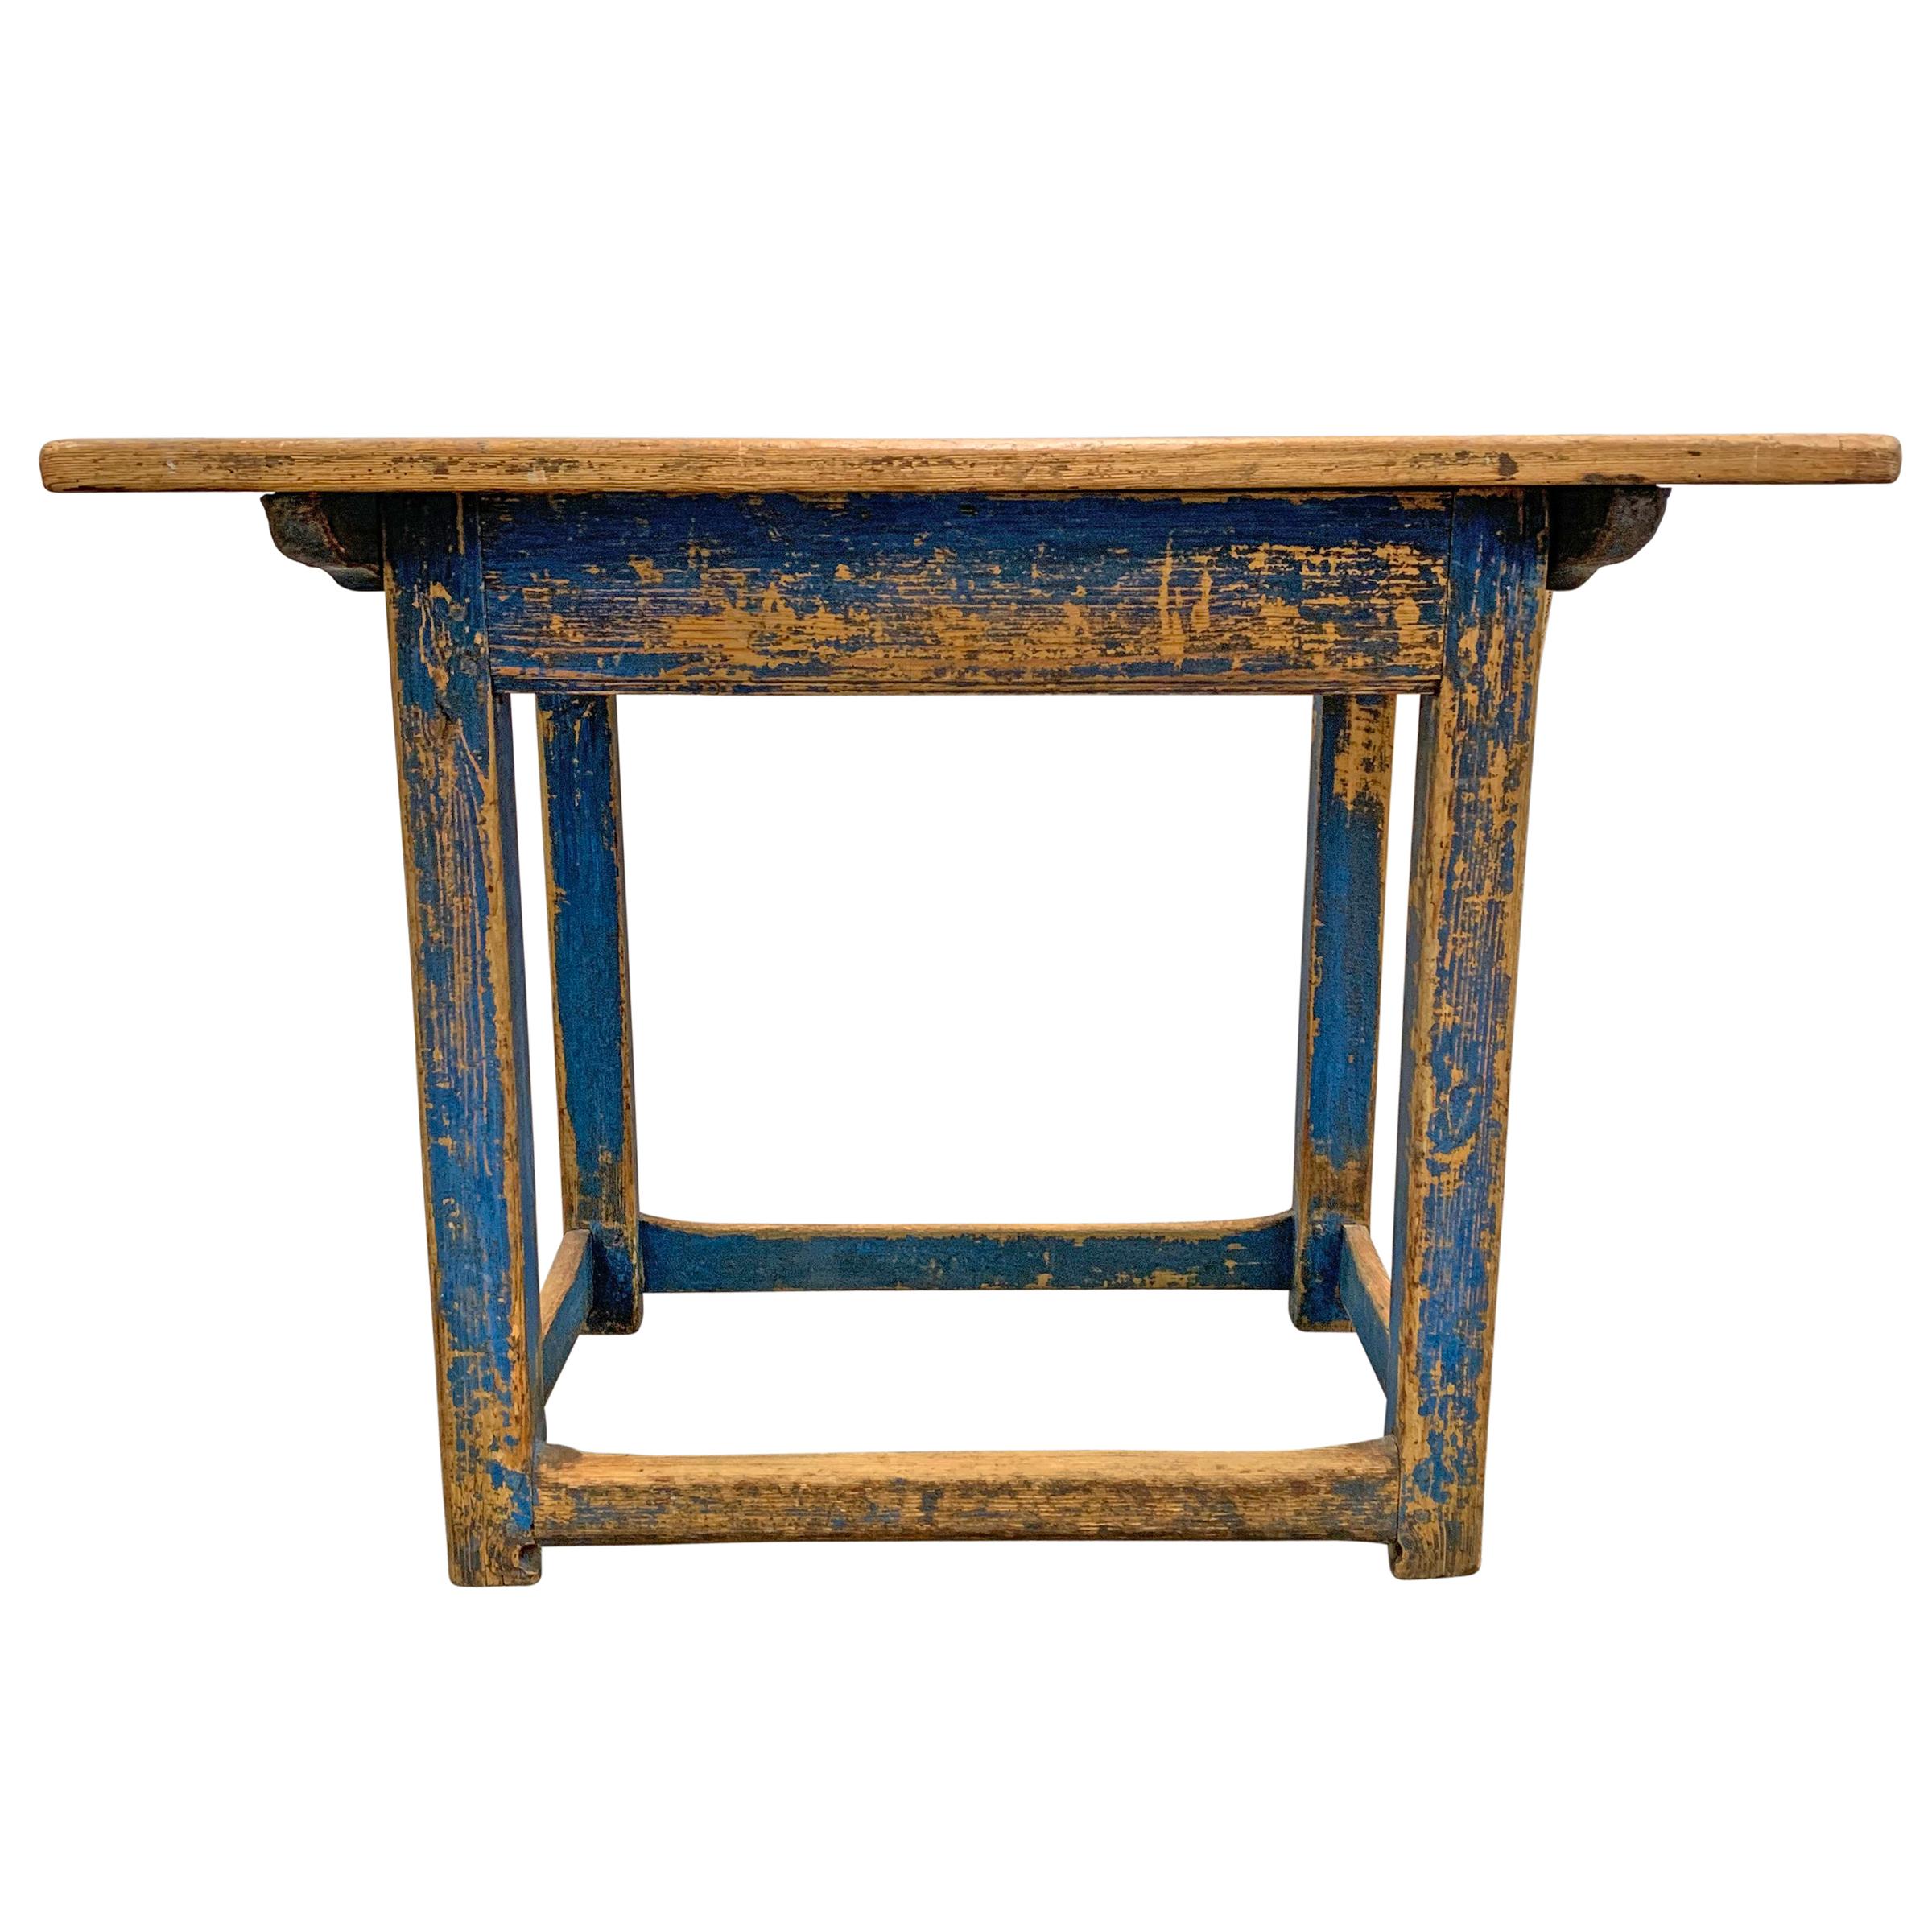 A gorgeous 18th century Swedish pine farm table with its original royal blue painted finish, and wonderfully worn stretchers showing centuries of use. The top is held to the base with wooden pegs.